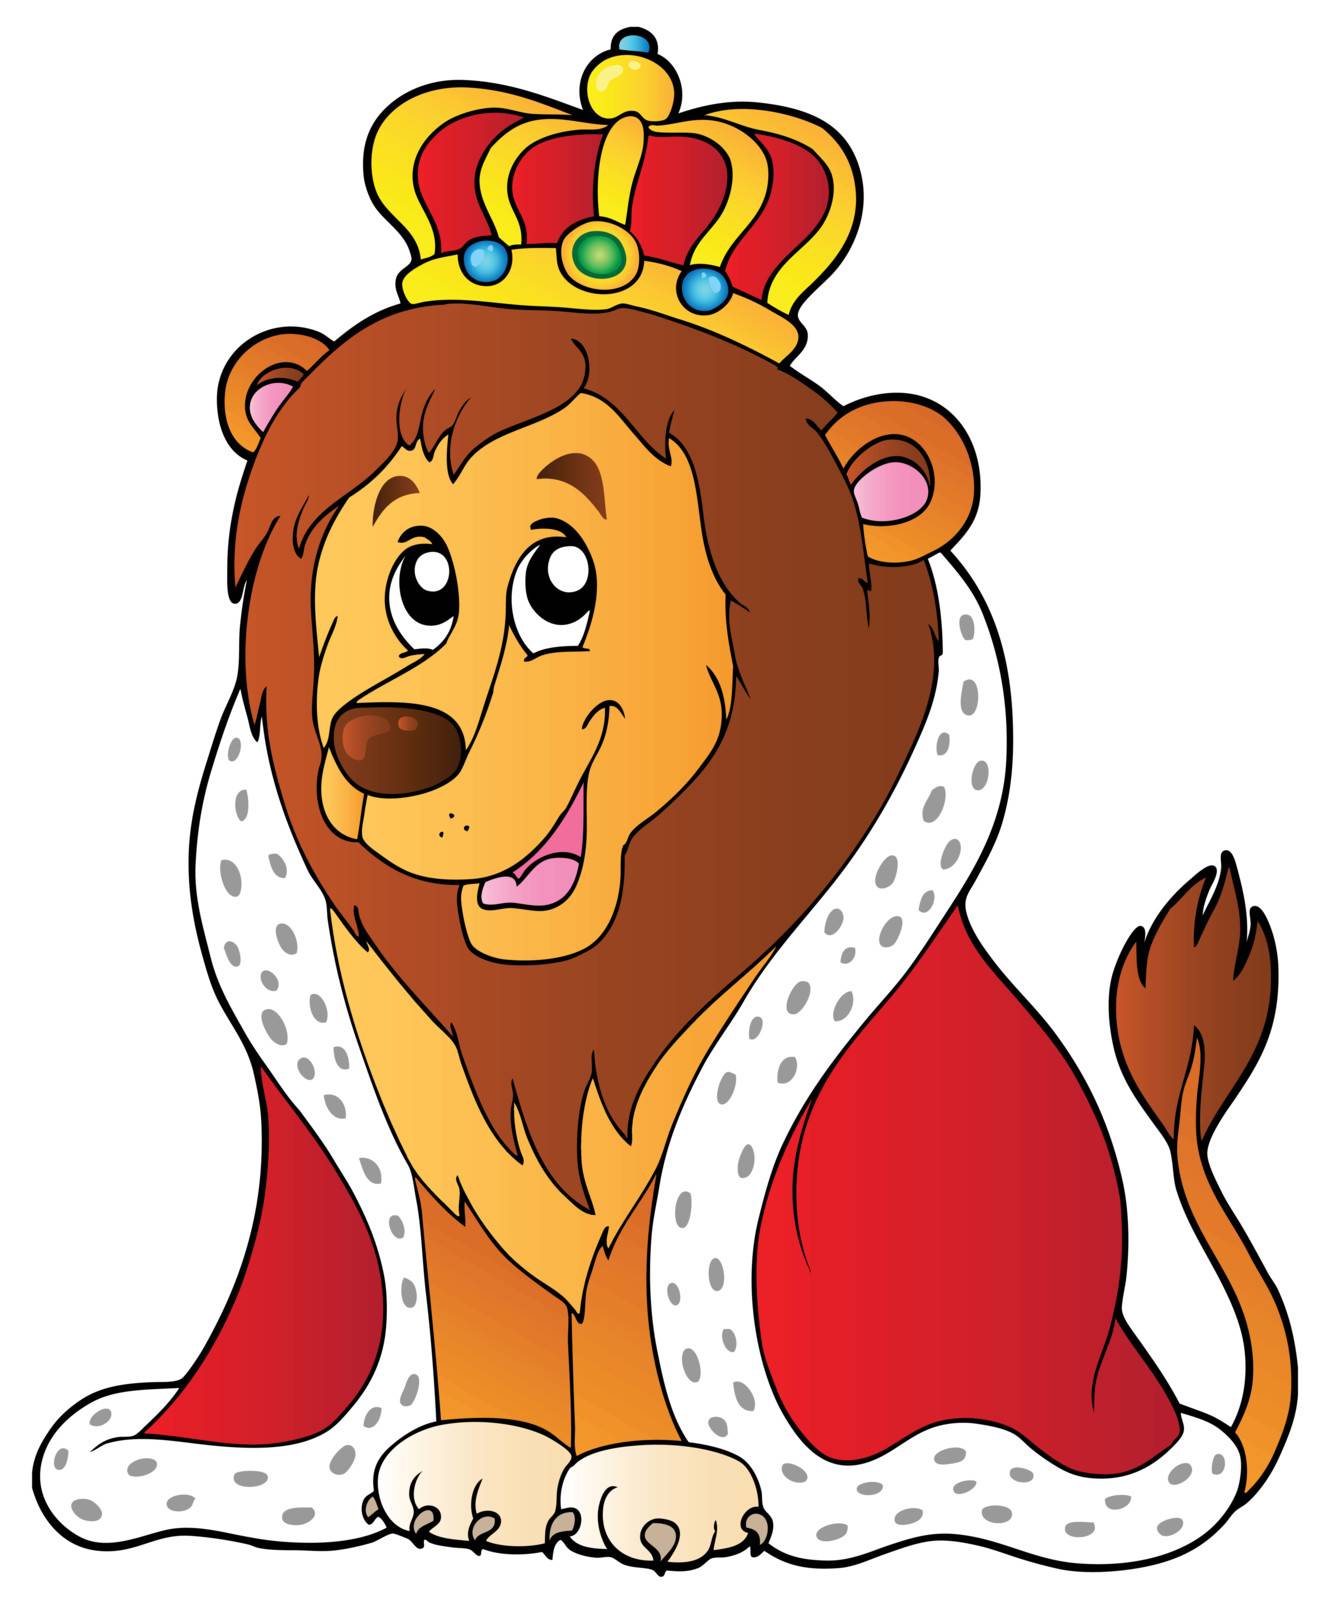 Cartoon lion in king outfit - vector illustration.